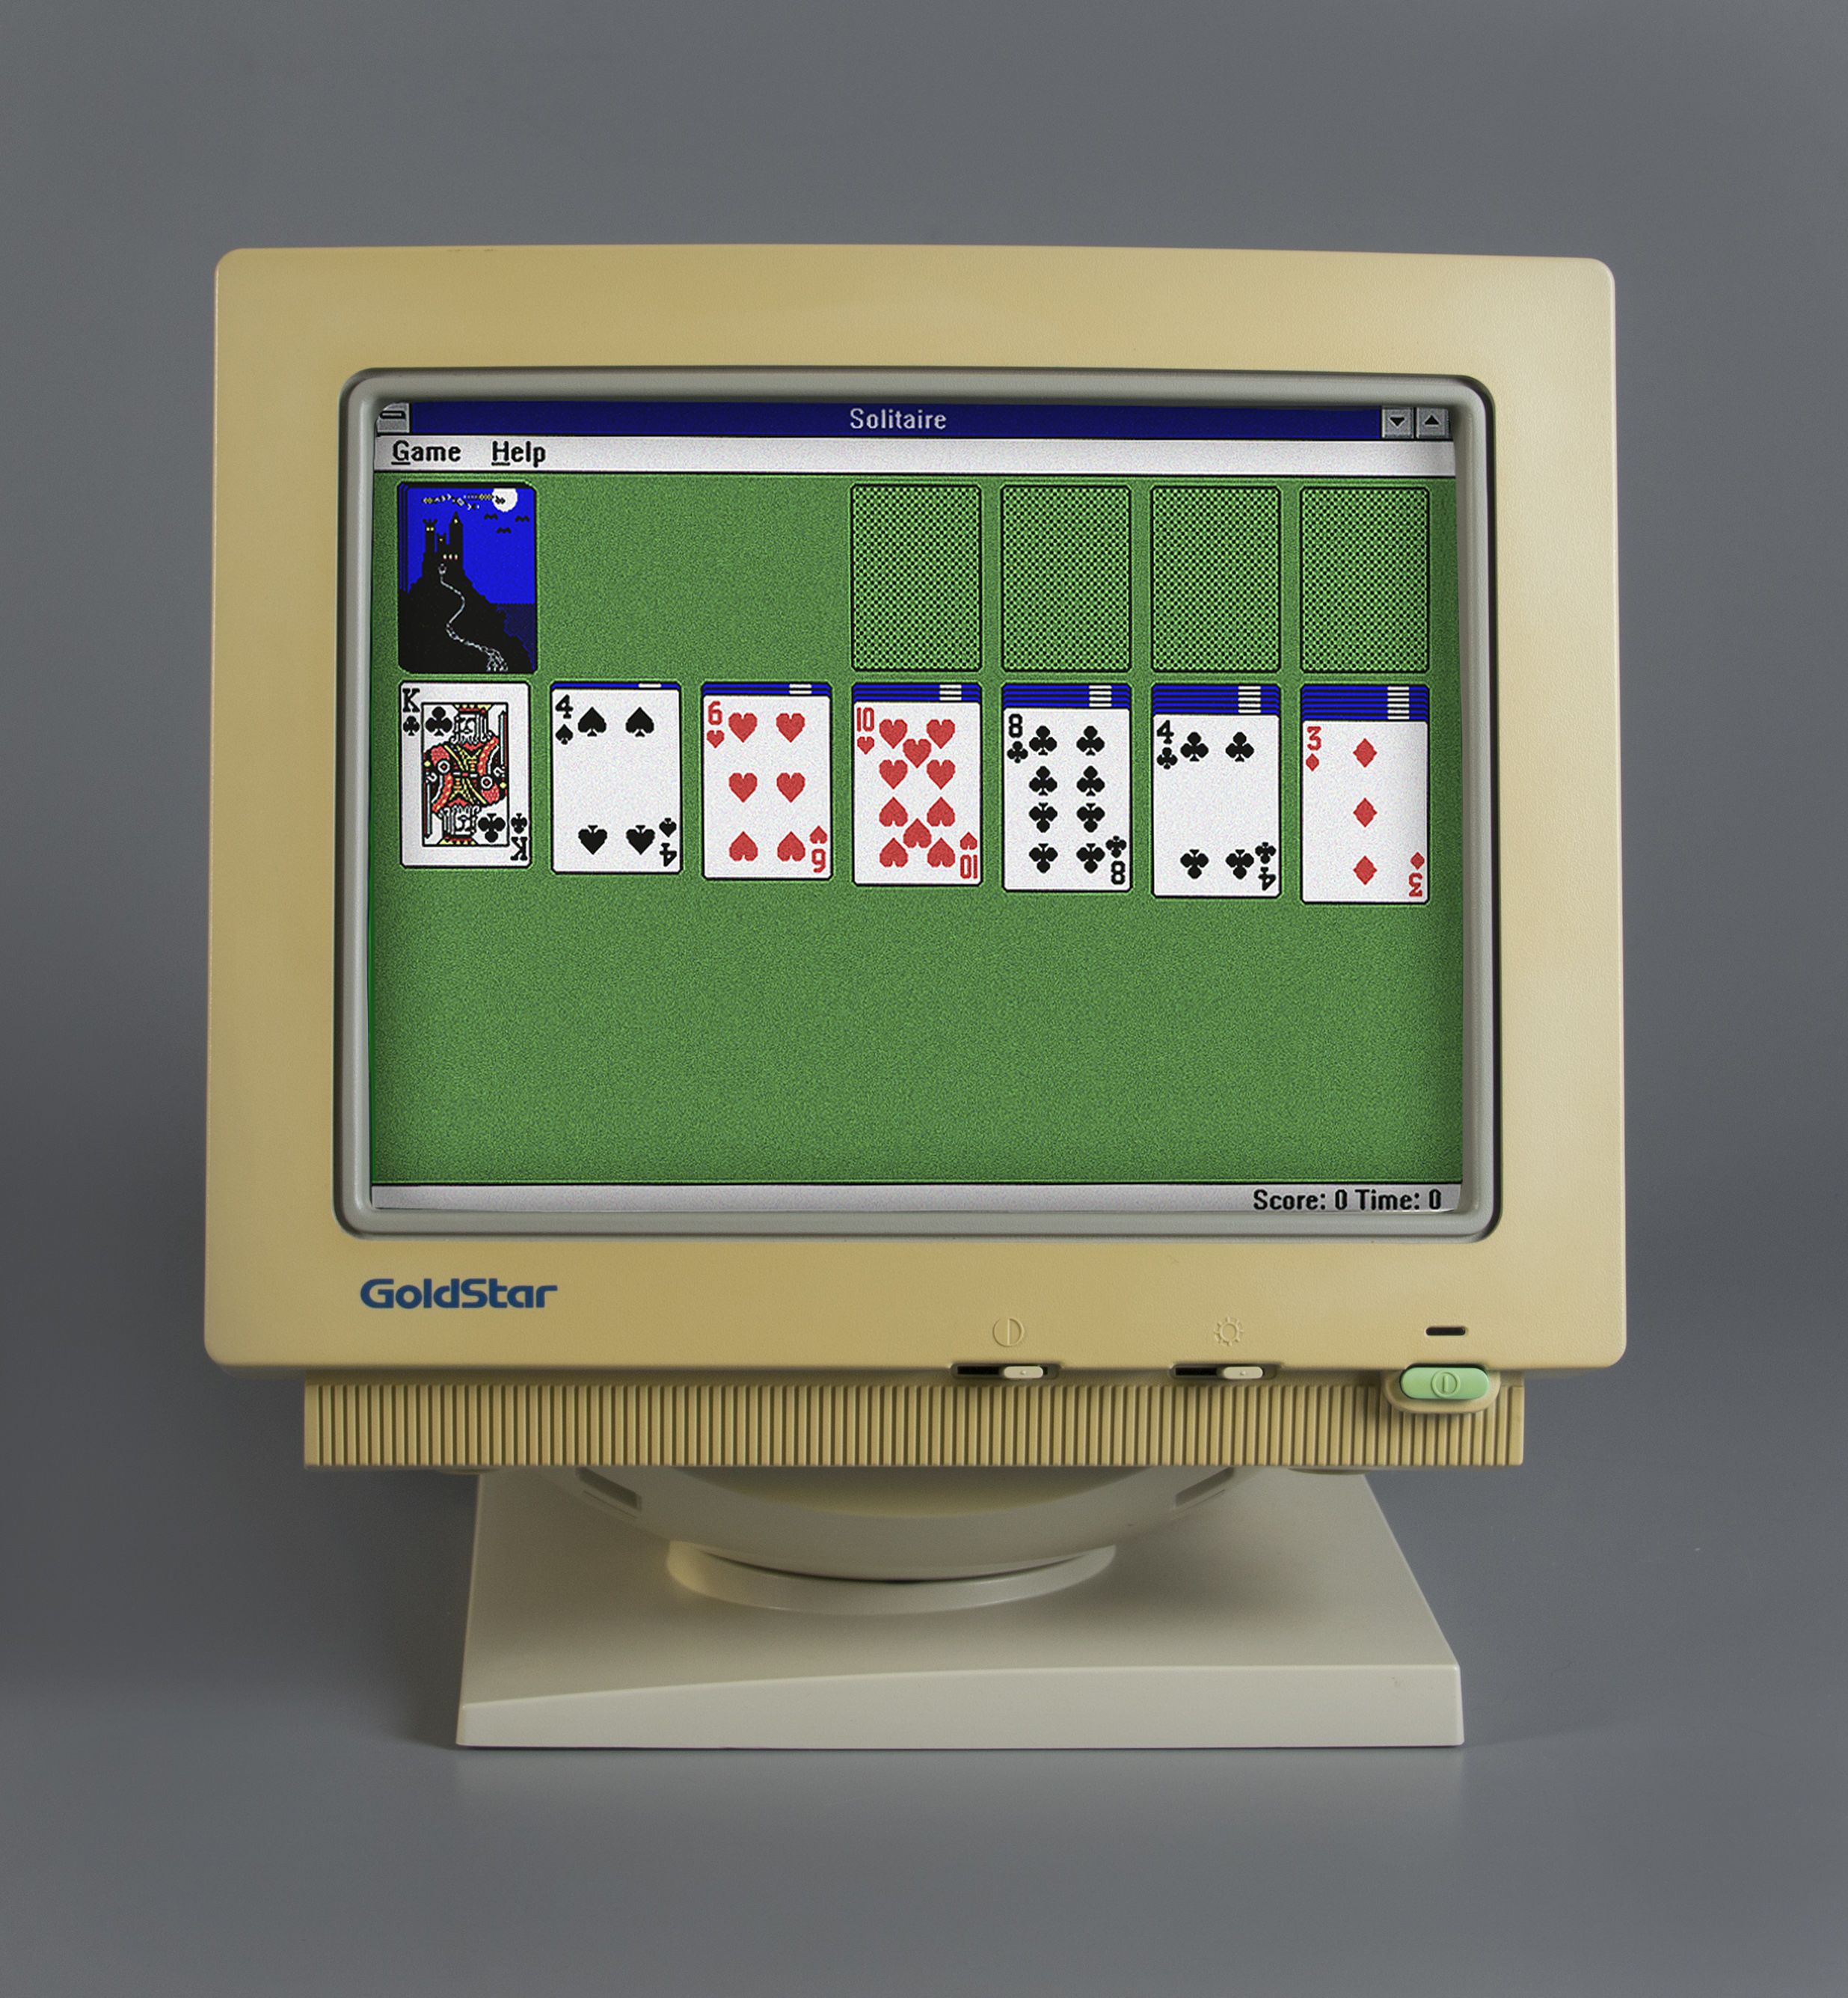 Windows Solitaire inducted into the World Video Game Hall of Fame